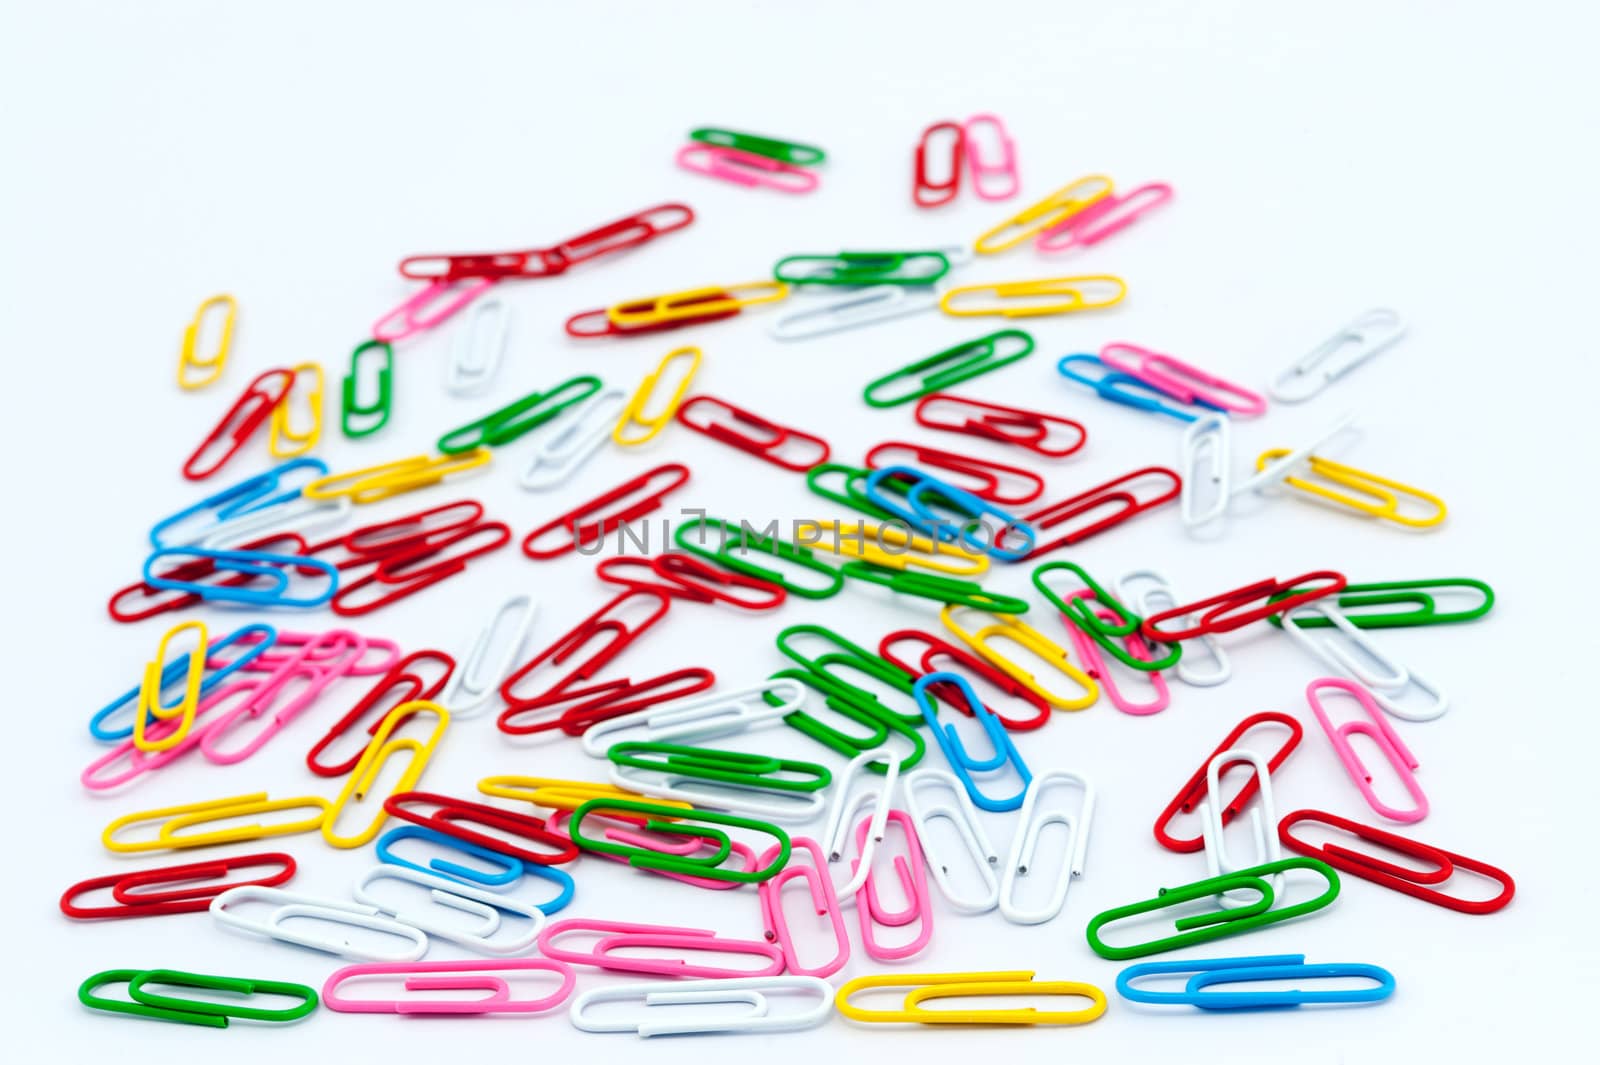 Colorful paper clips by raywoo